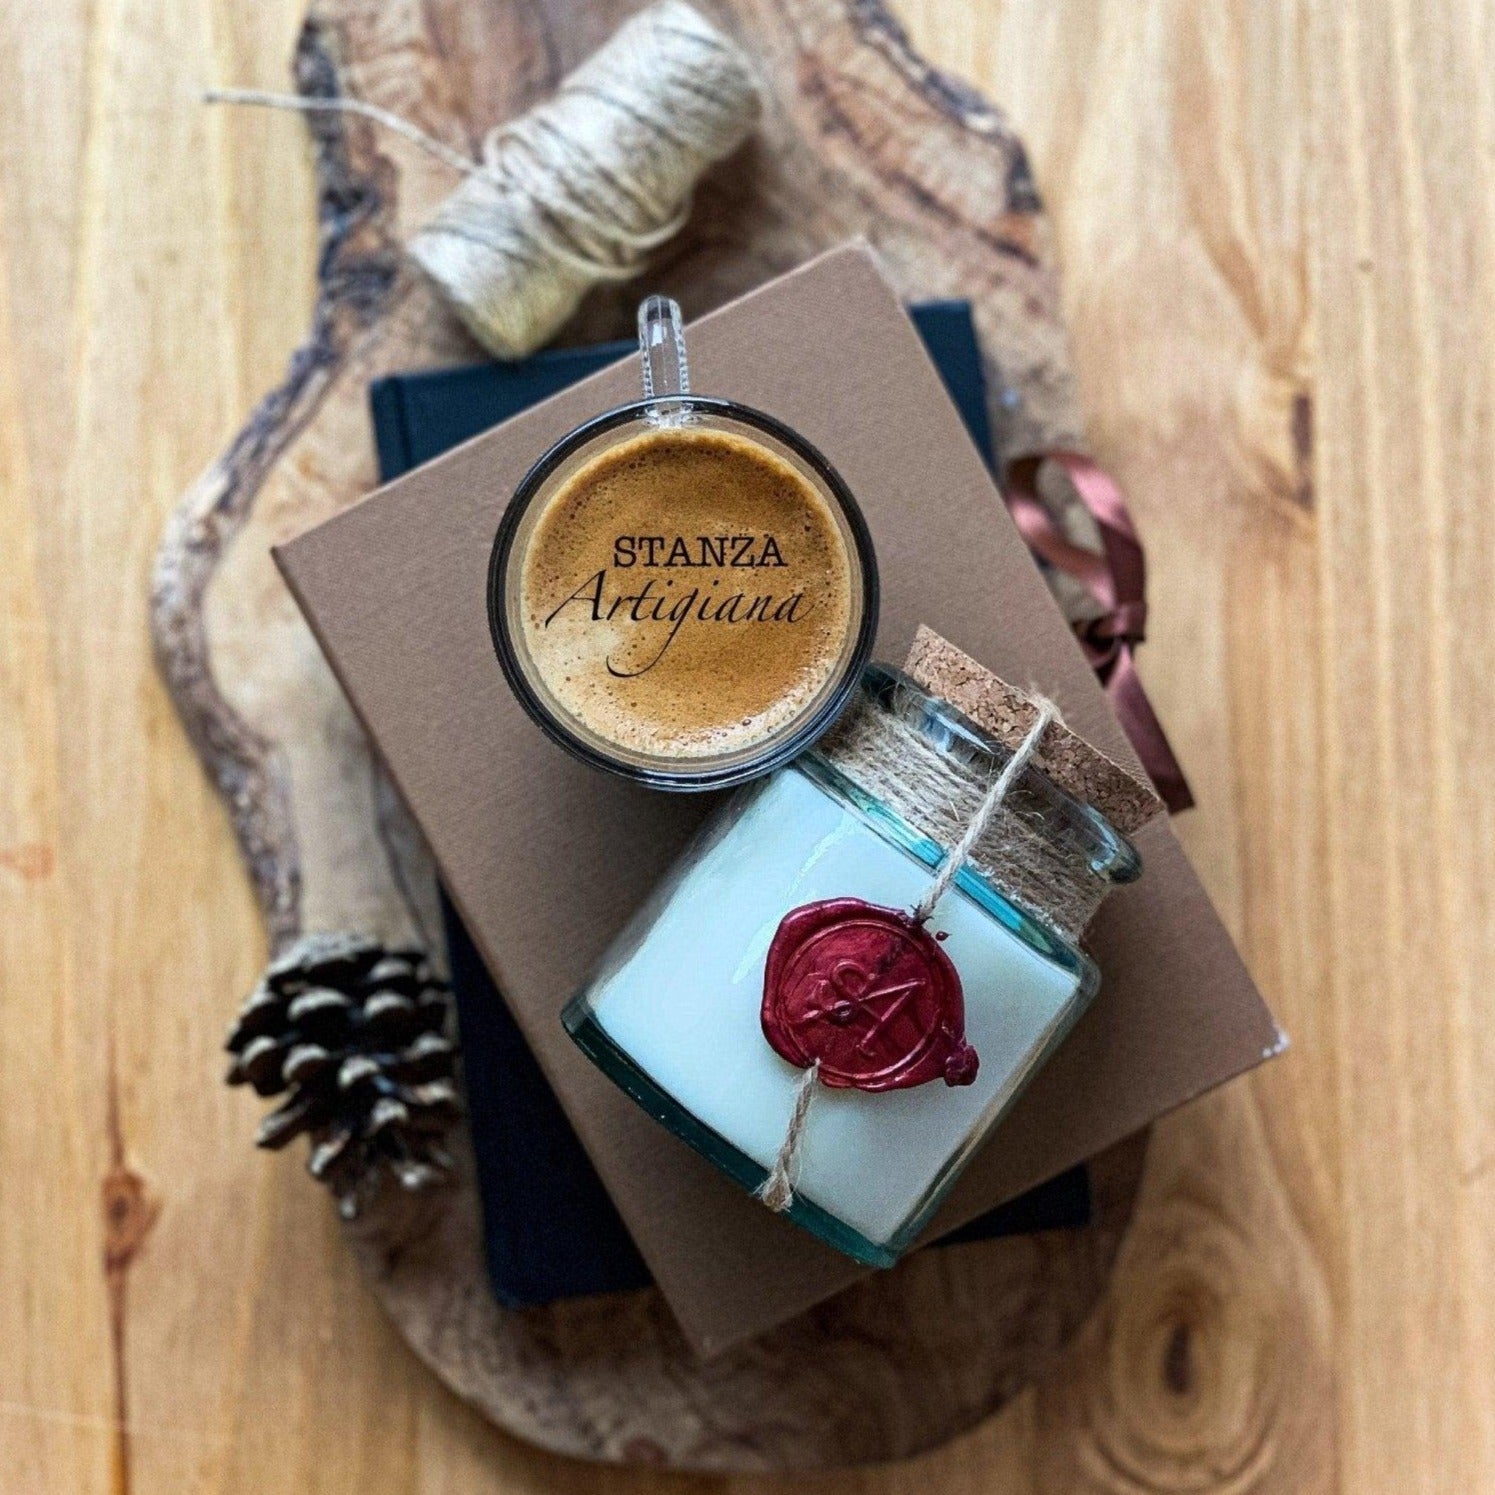 Sustainable Soy Pot Candle - No. 2 Tuscan Leather by STANZA Artigiana-4